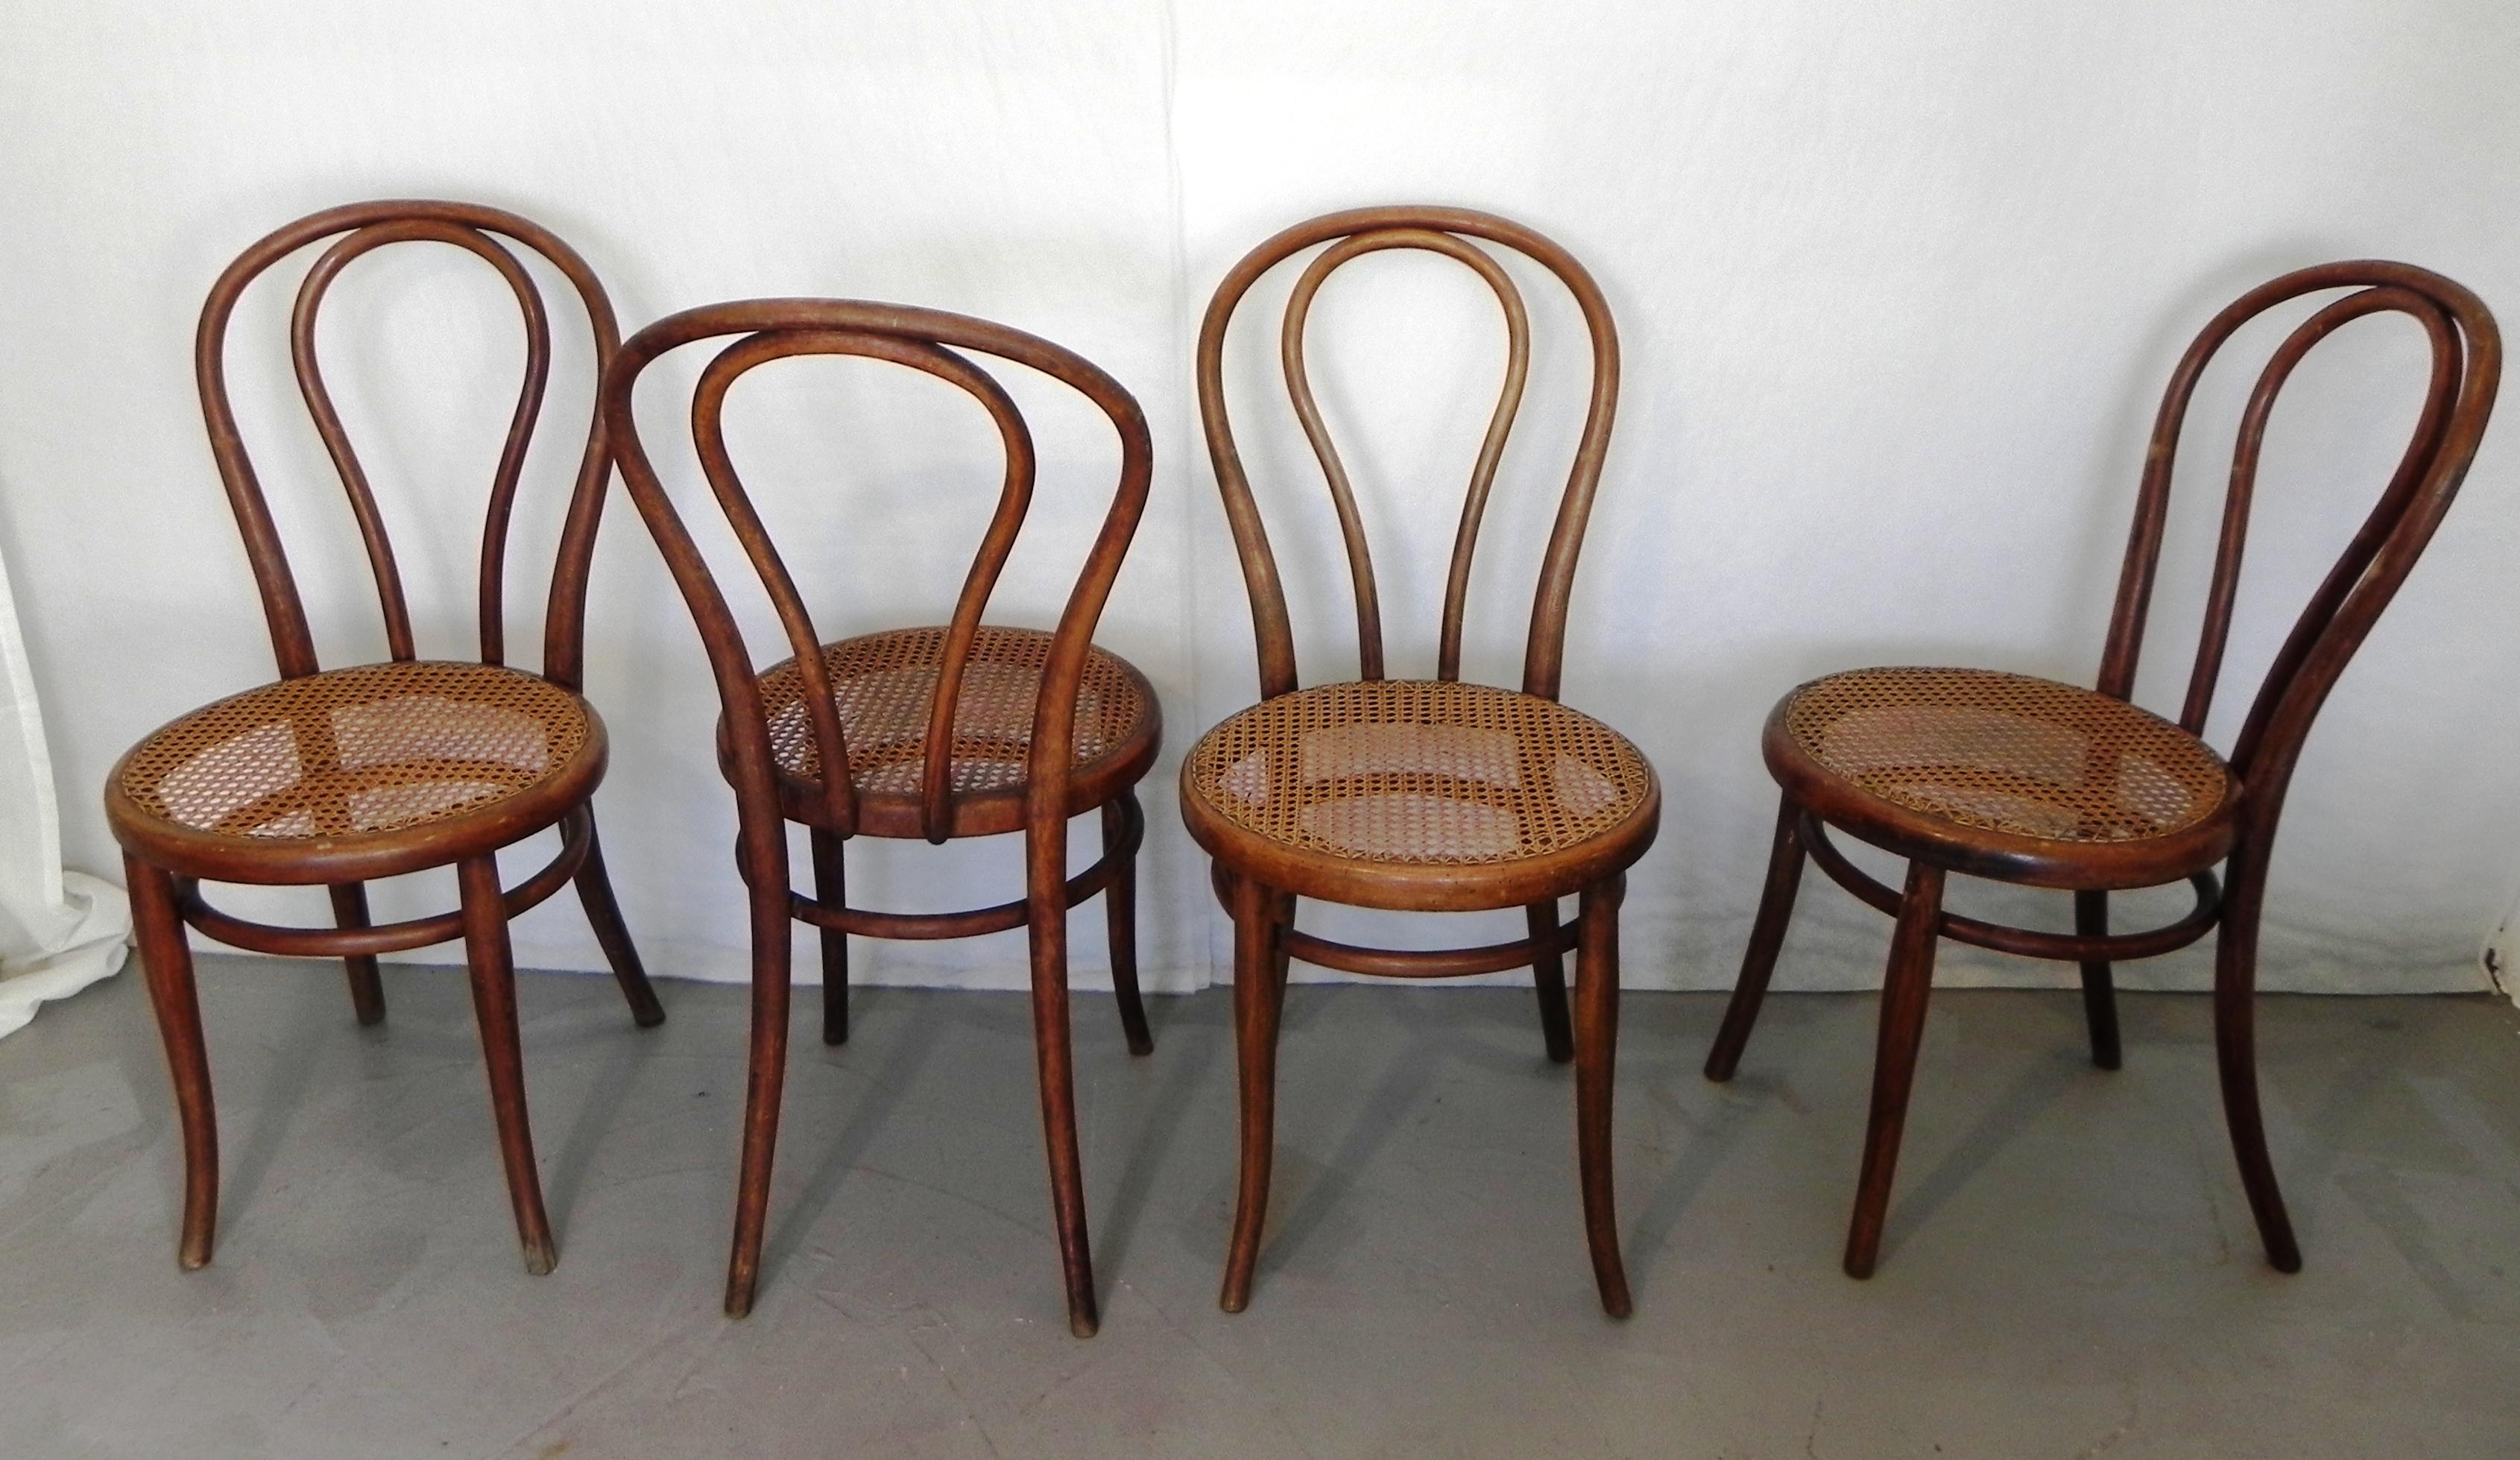 Early 20th Century 4 Thonet Austria No. 18 chairs